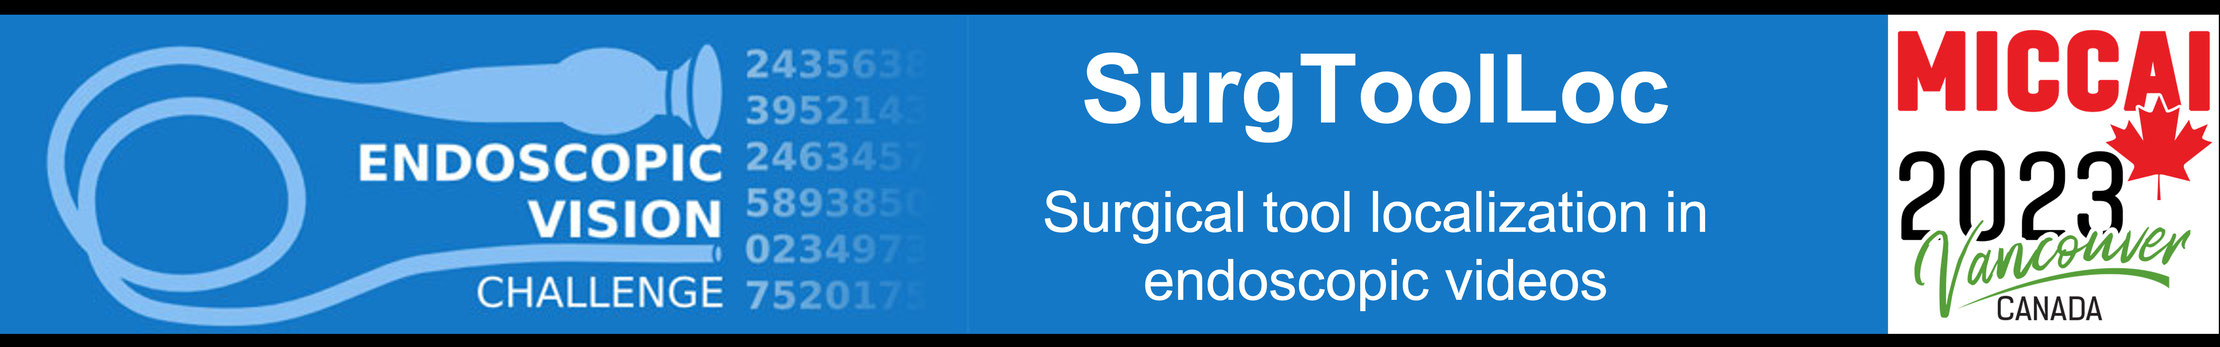 Endoscopic surgical tool localization using tool presence labels Banner